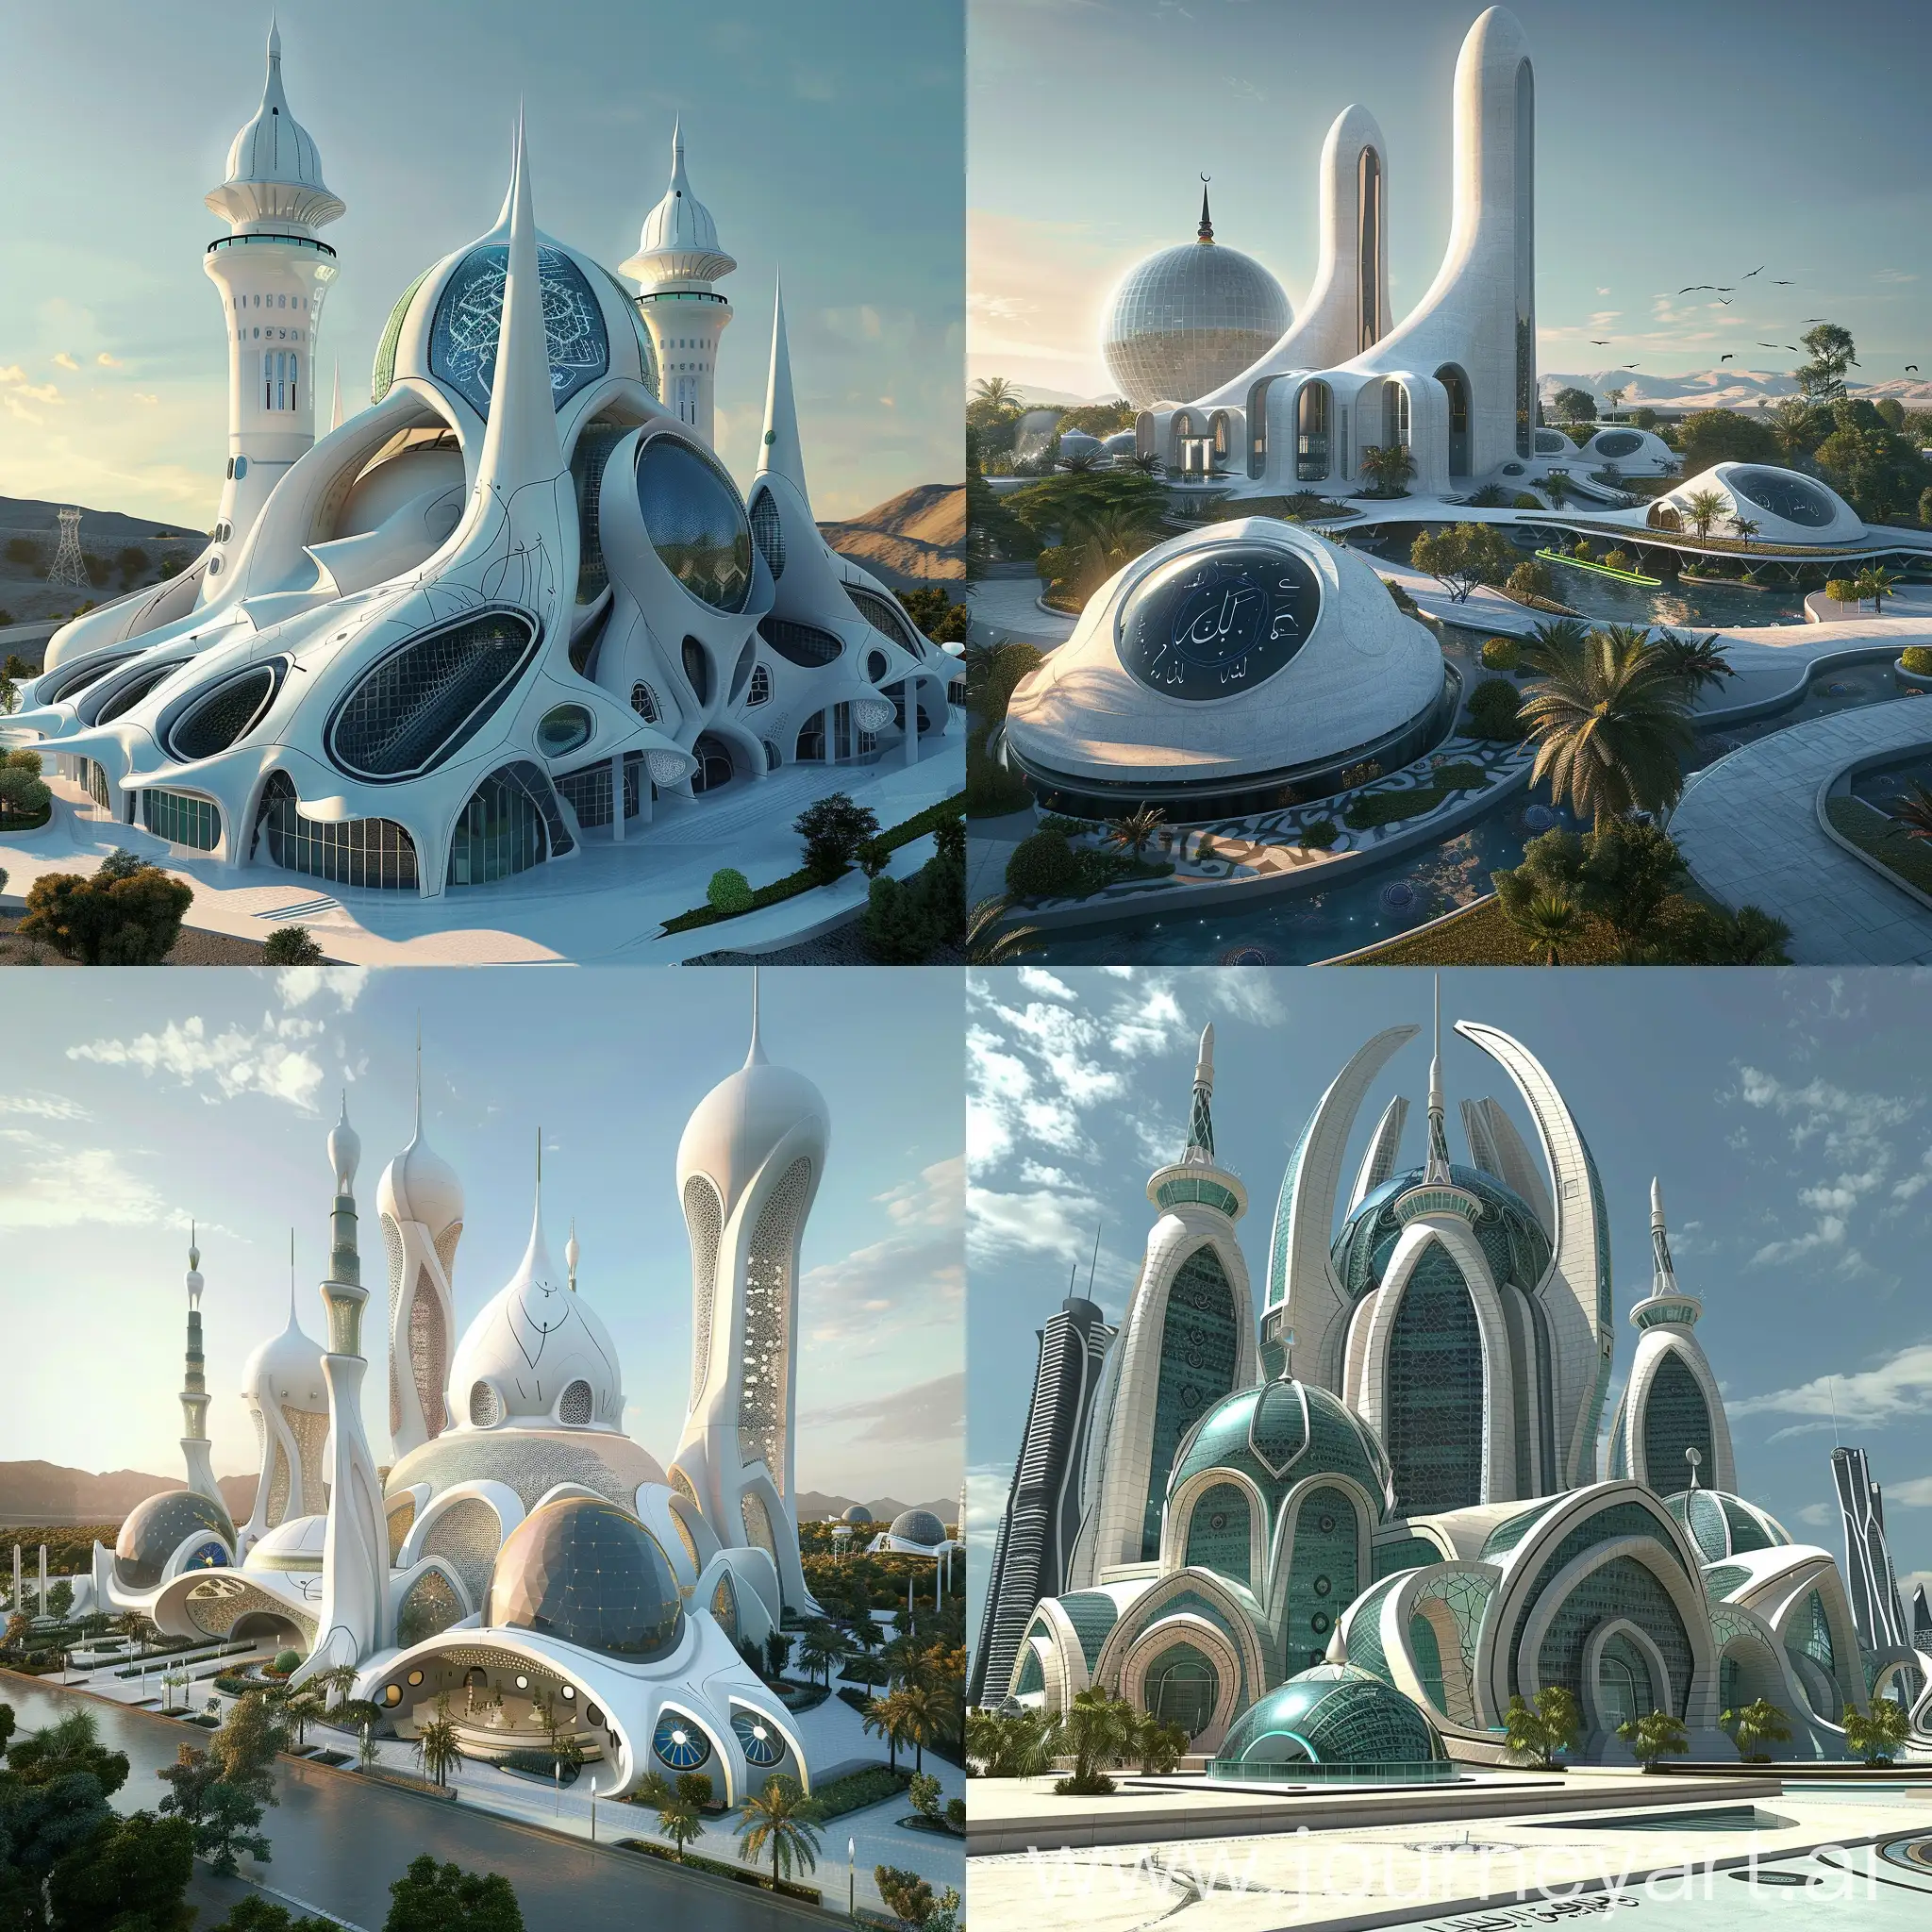 Sci-Fi mosque, Advanced Science and Technology, Advanced, Smart Climate Control, Energy Harvesting Prayer Mats, Augmented Reality Qibla Finder, Interactive Educational Walls, Robotic Maintenance Units, Eco-Friendly Wudu Areas, Solar Dome, Sound Optimization, Digital Donation Stations, Virtual Reality Prayer Spaces, Dynamic Façade, Green Minarets, Water Reclamation Systems, Drone Technology, Adaptive Lighting, Retractable Roof, Solar-Powered Calligraphy, Elevated Gardens, Smart Parking Solutions, Holographic Displays, In Unreal Engine 5 Style --stylize 1000